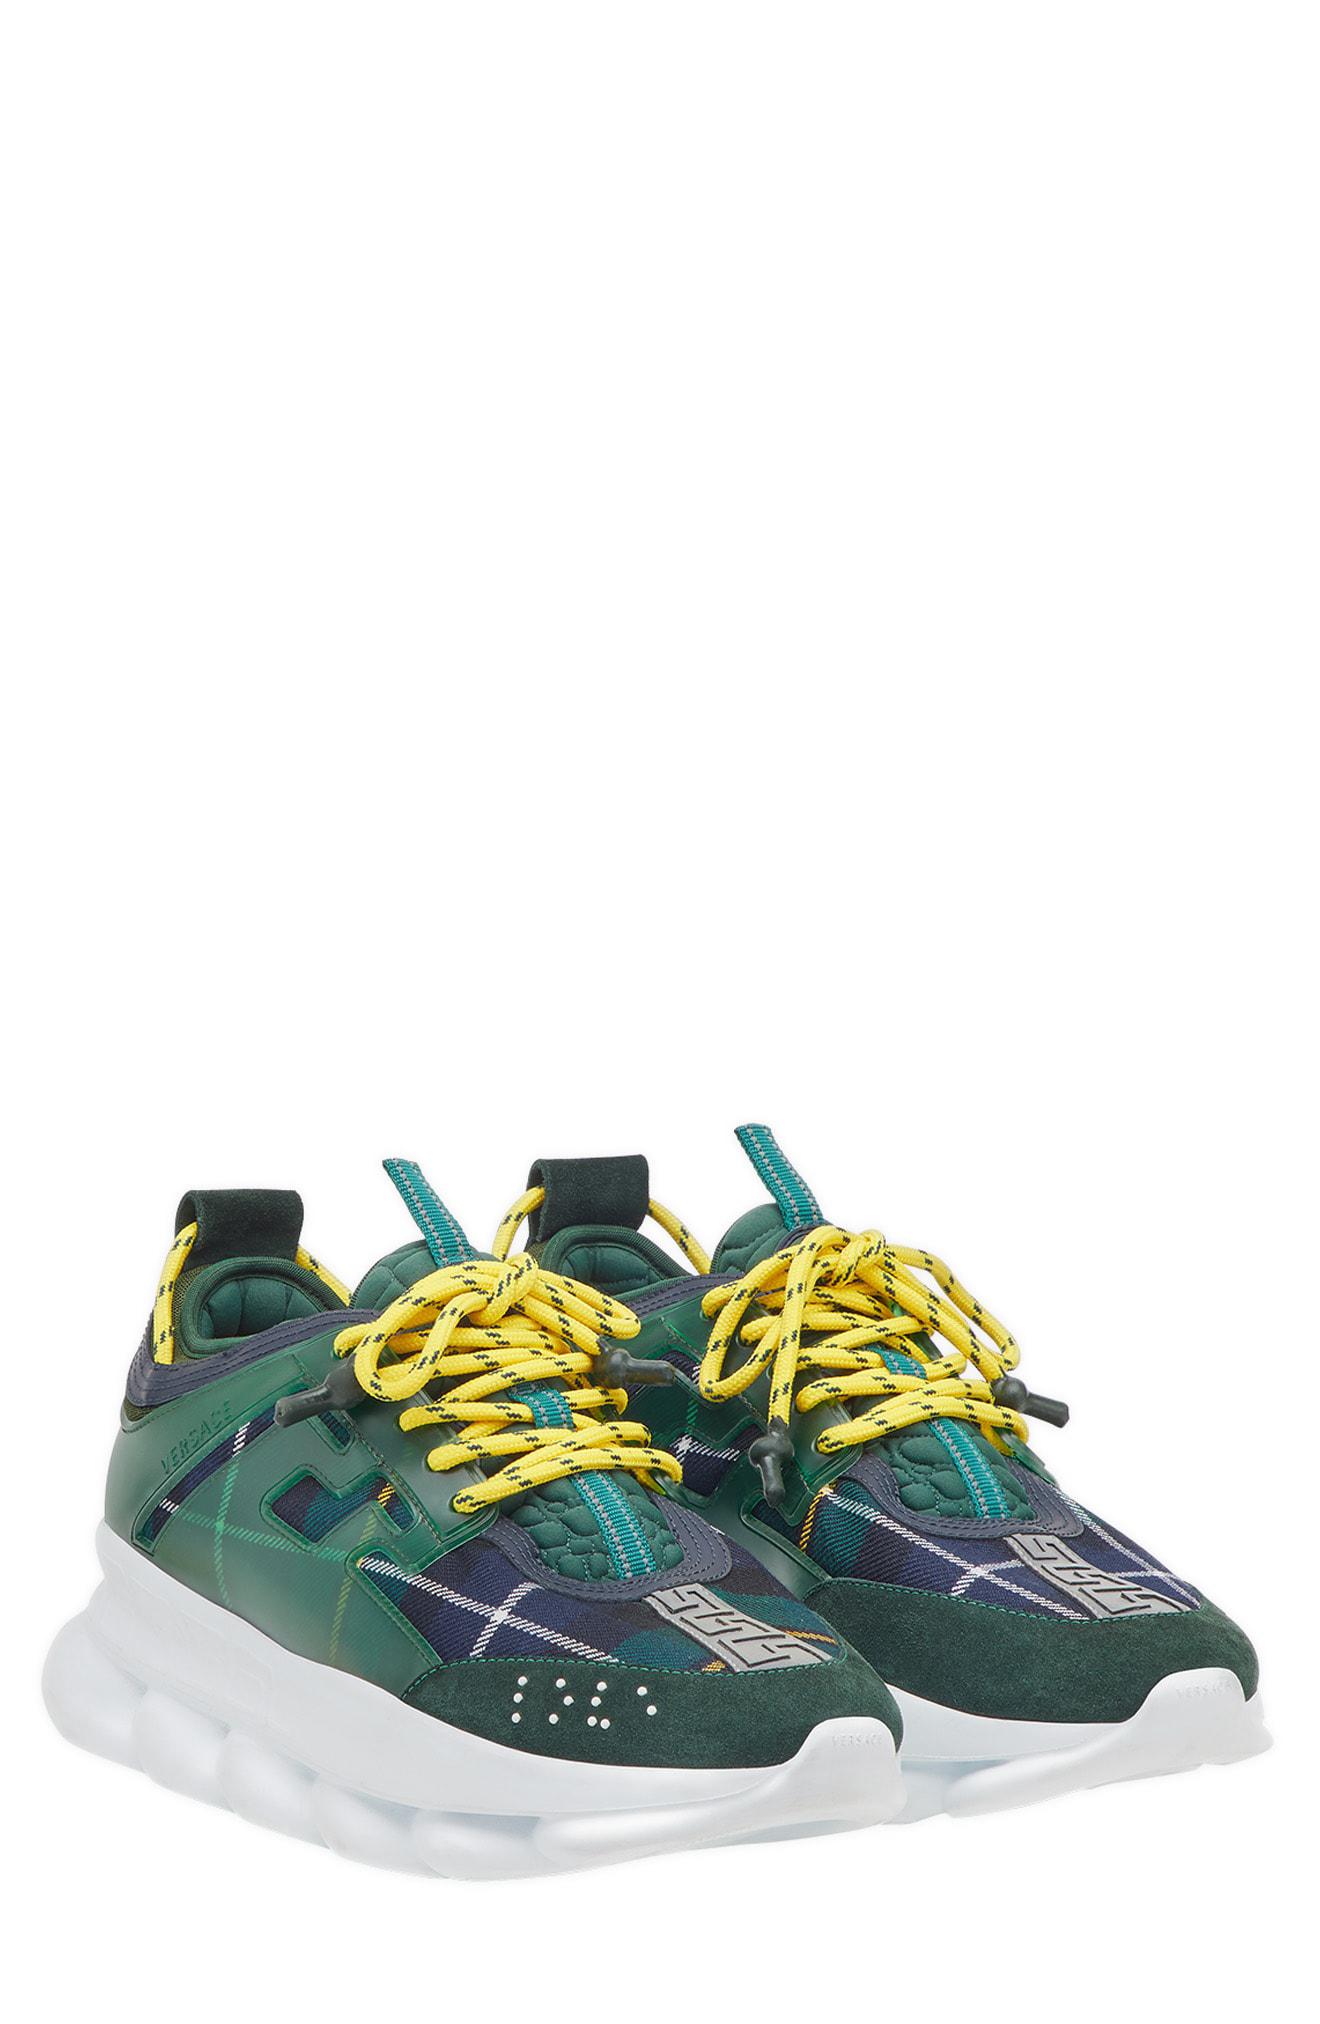 Versace Chain Reaction Sneakers in Green for Men - Lyst